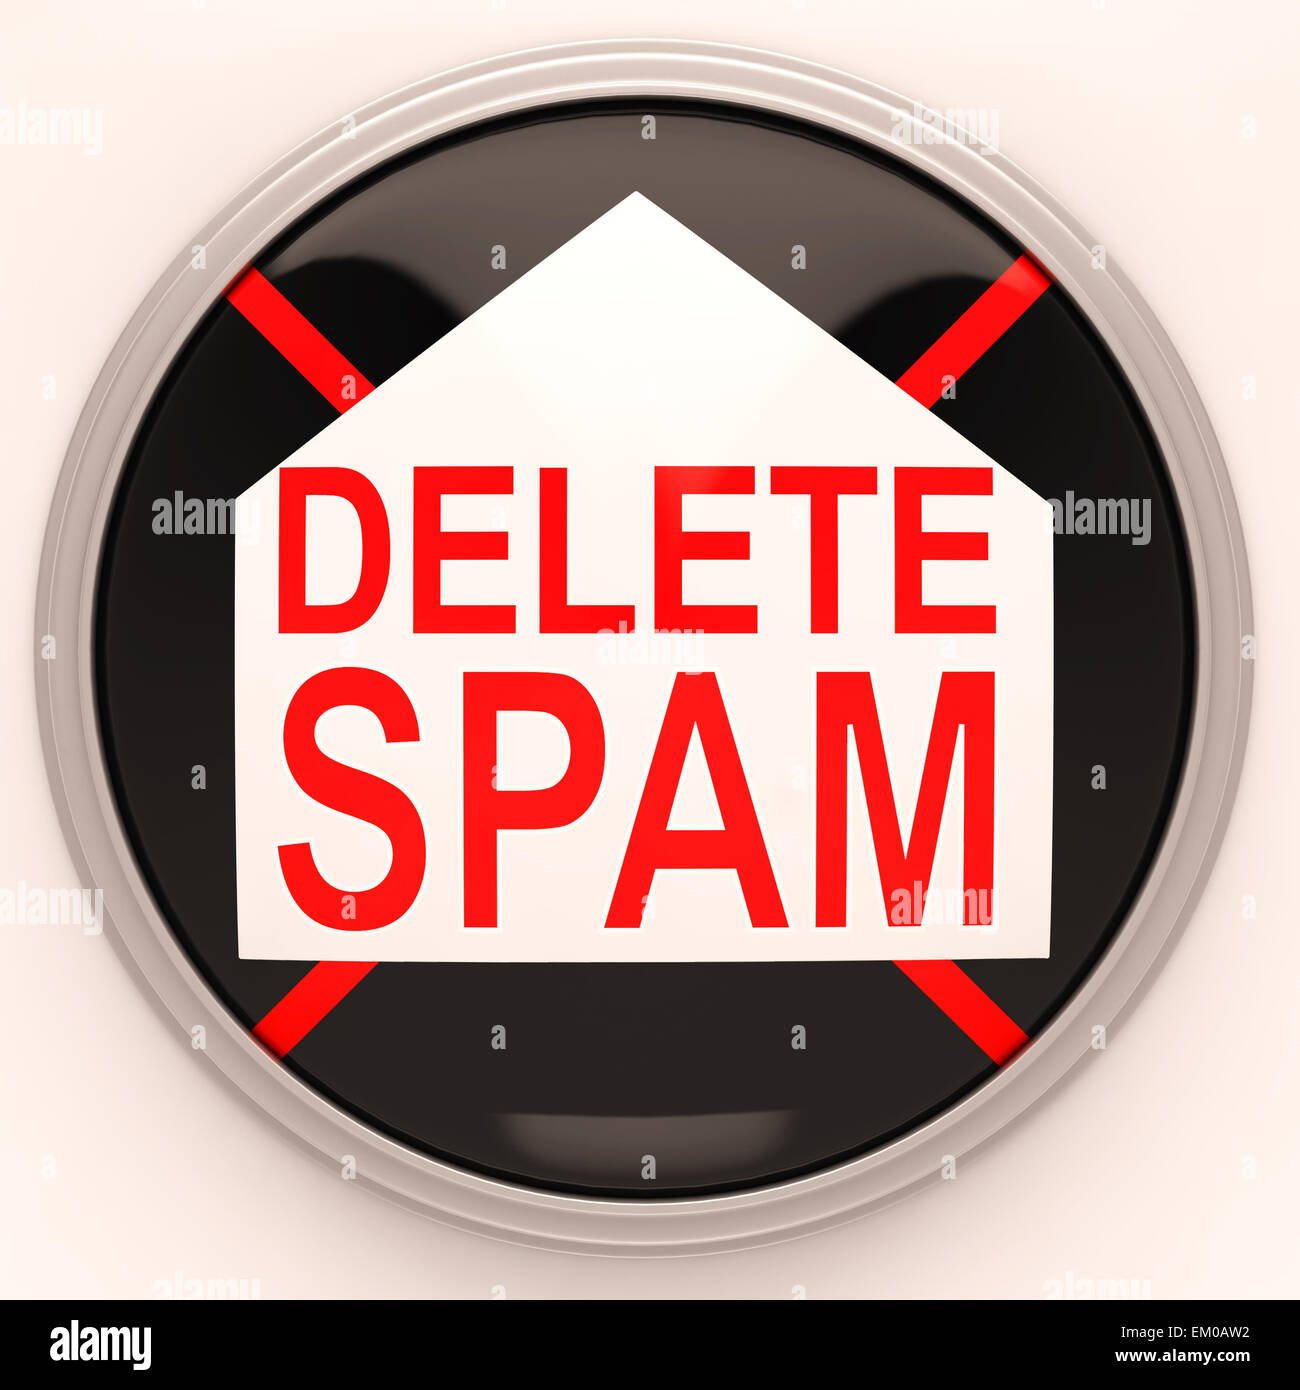 Delete Spam Shows Removing Unwanted Junk Email Stock Photo